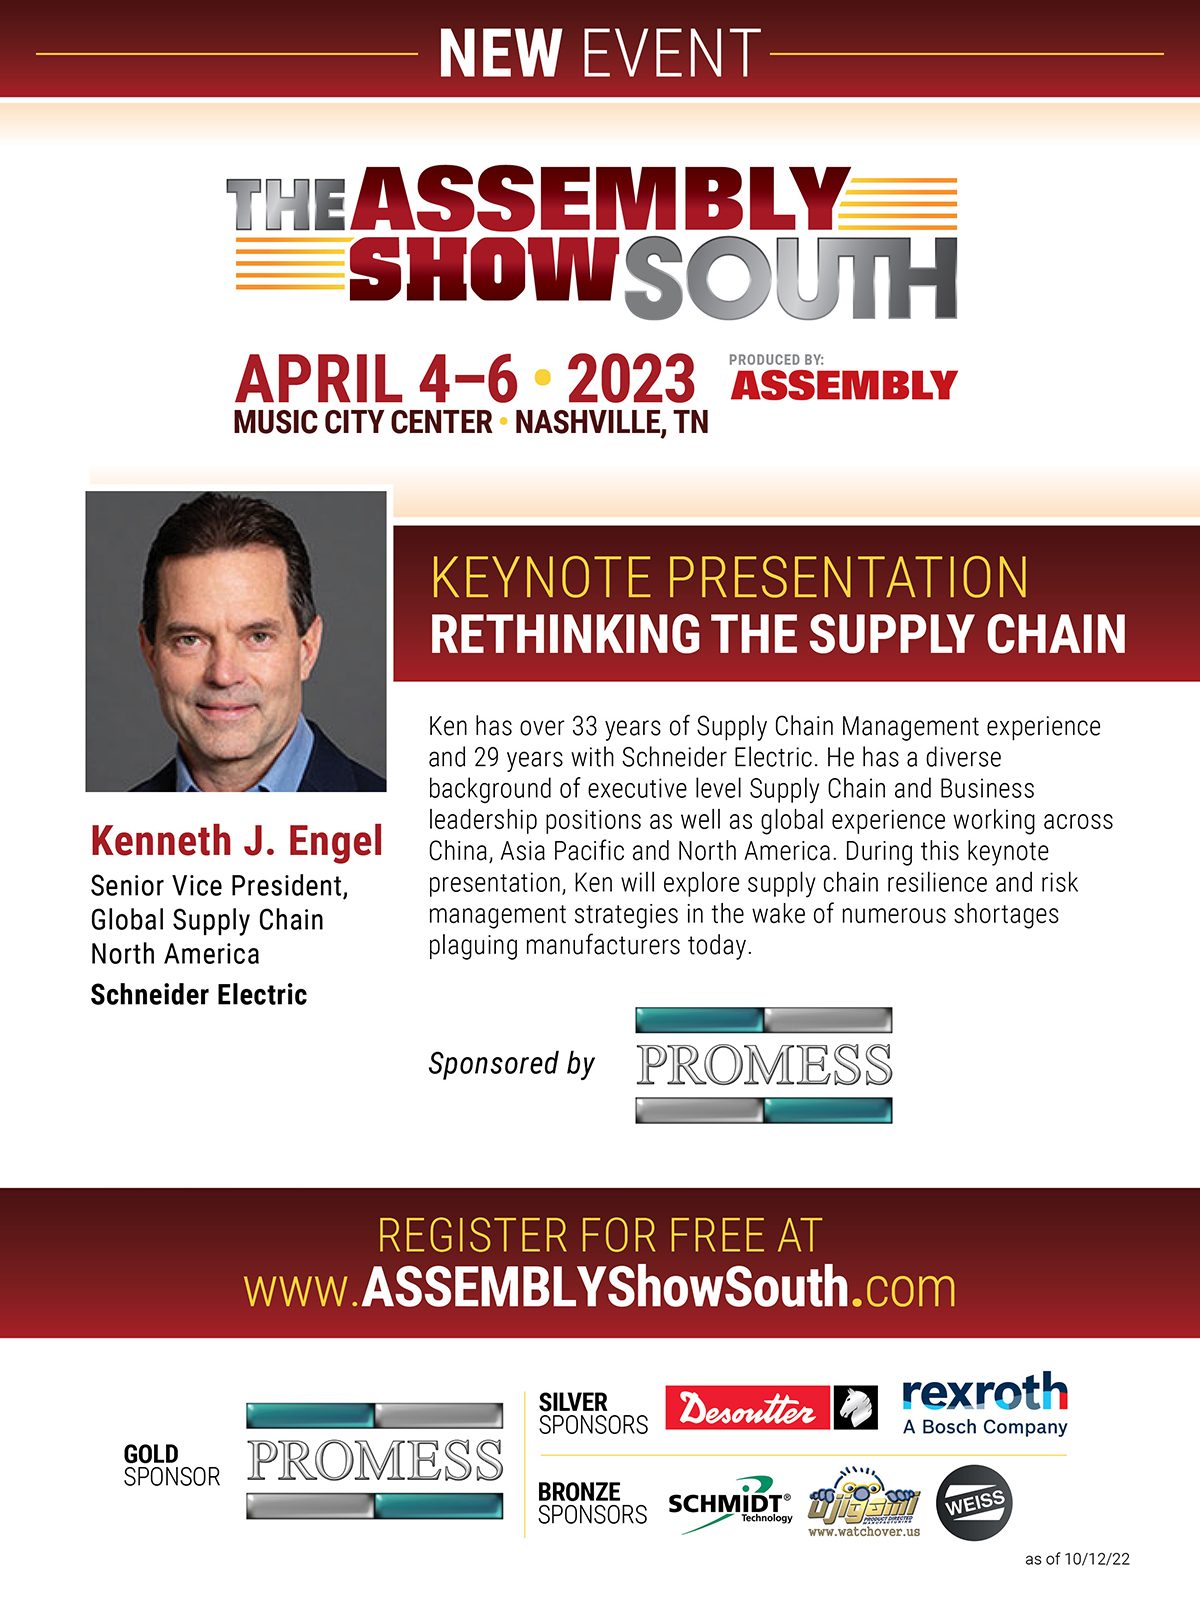 Ad: The Assembly Show South